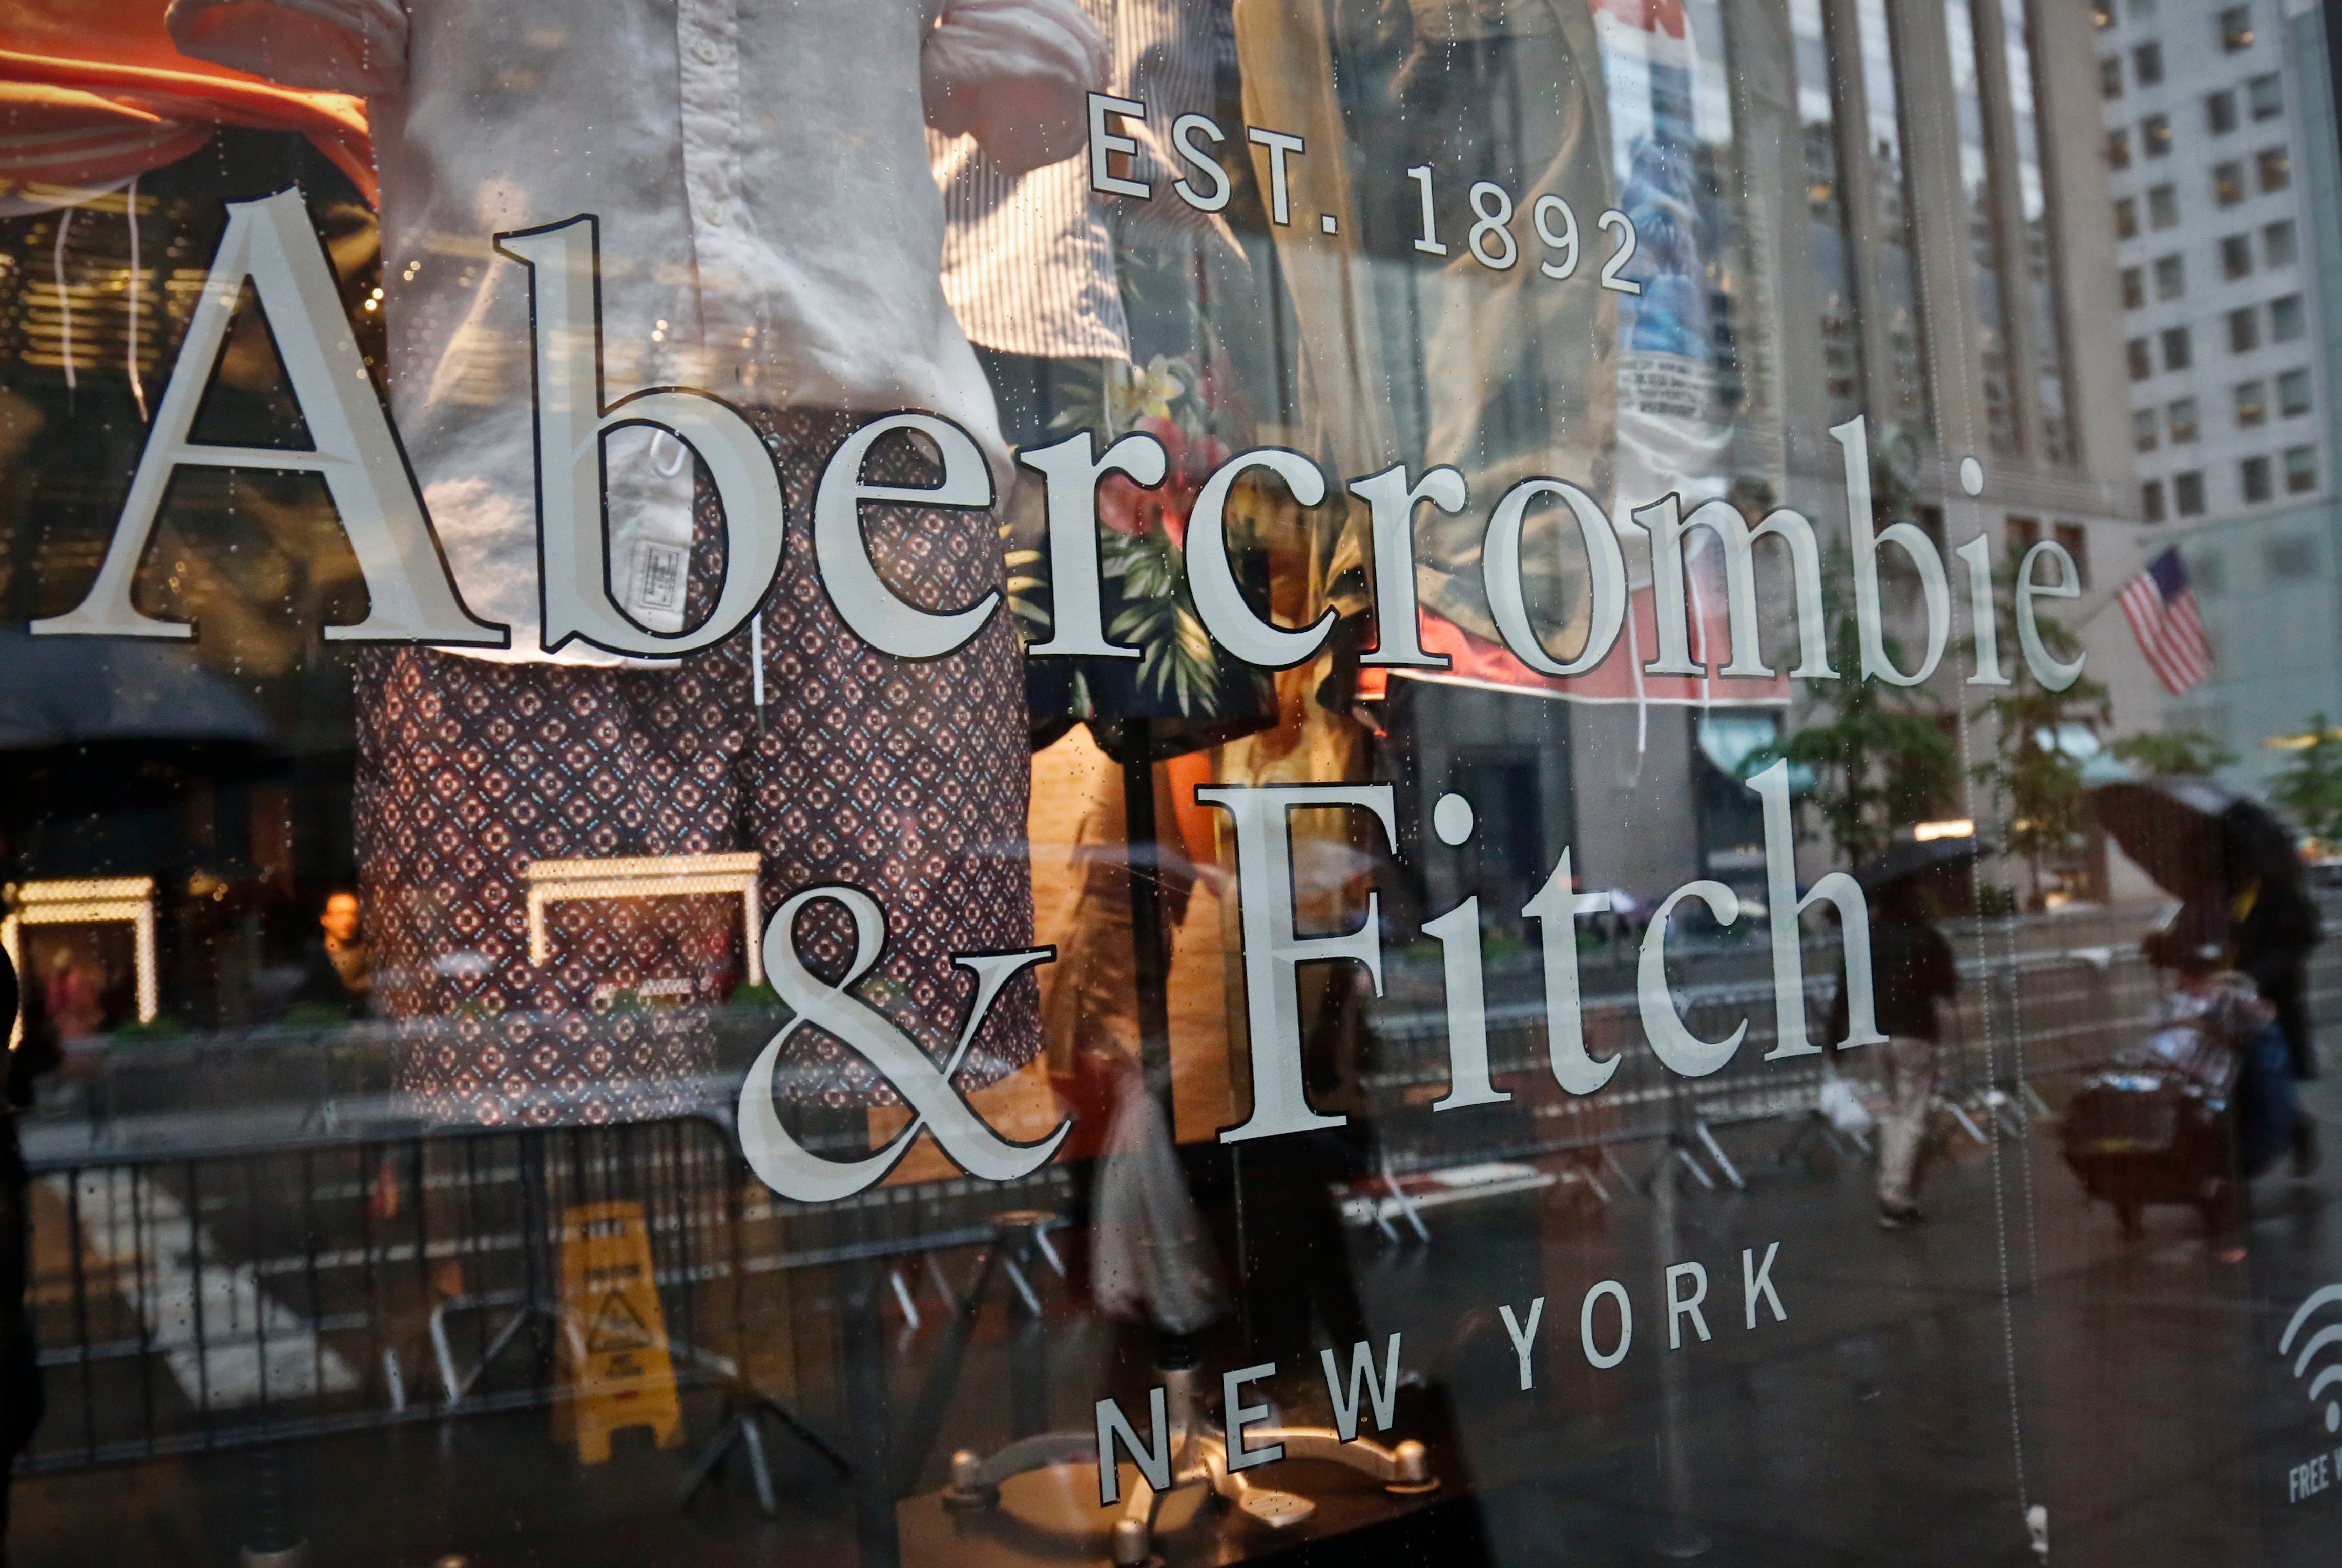 Abercrombie & Fitch said a new executive leadership team and refreshed board of directors had transformed its brands over past decade